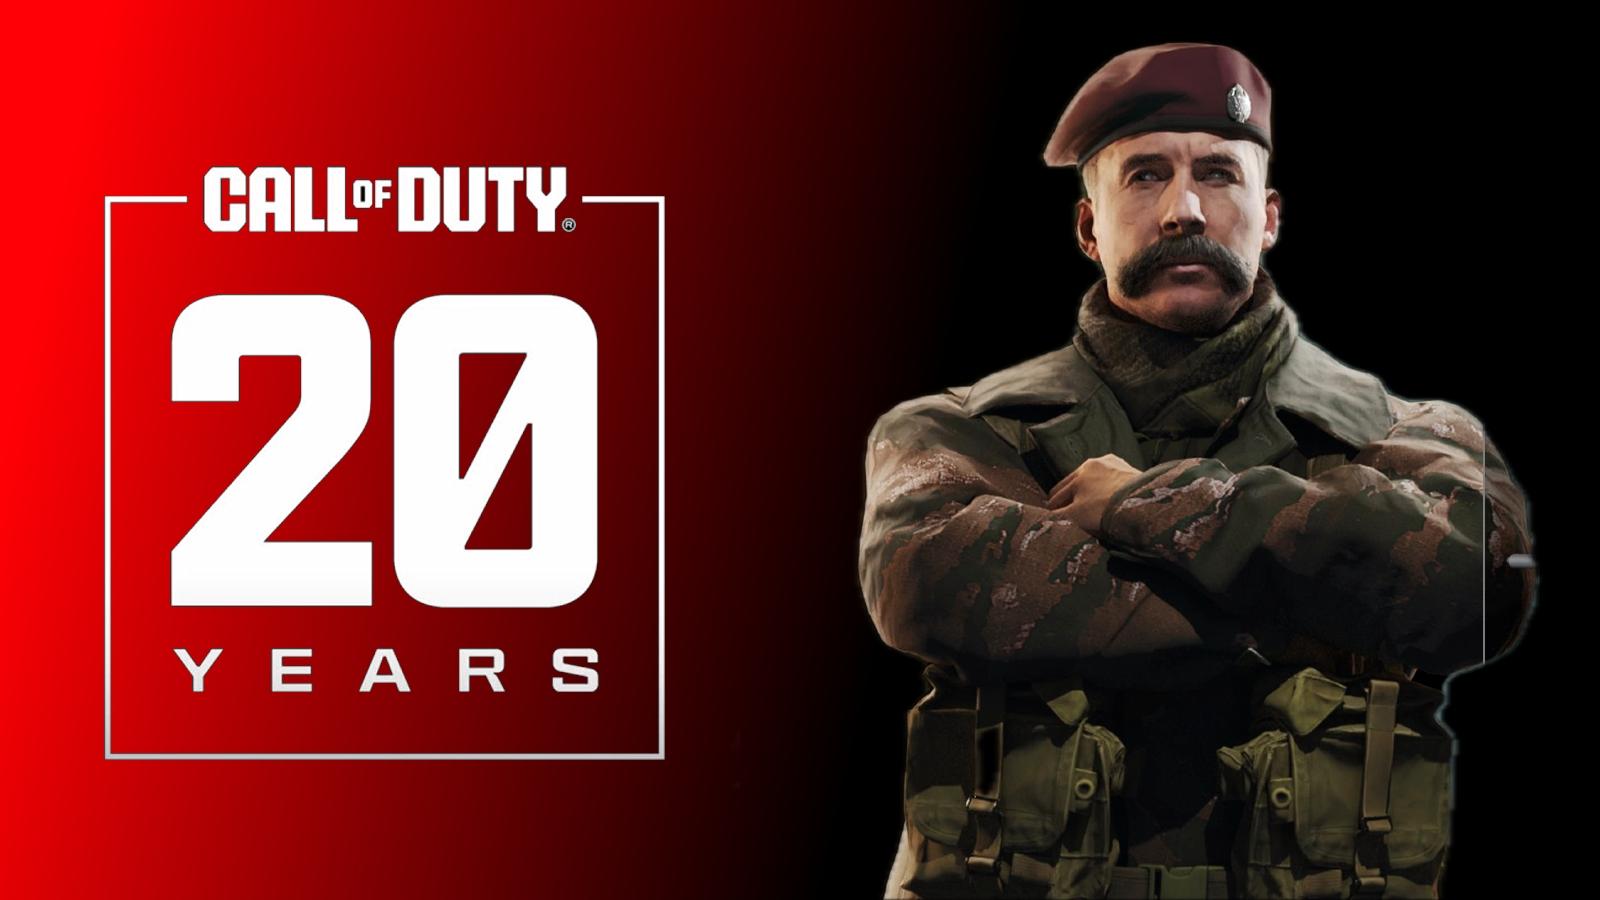 20 years of call of duty logo next to COD 2 old school Capt Price Operator skin